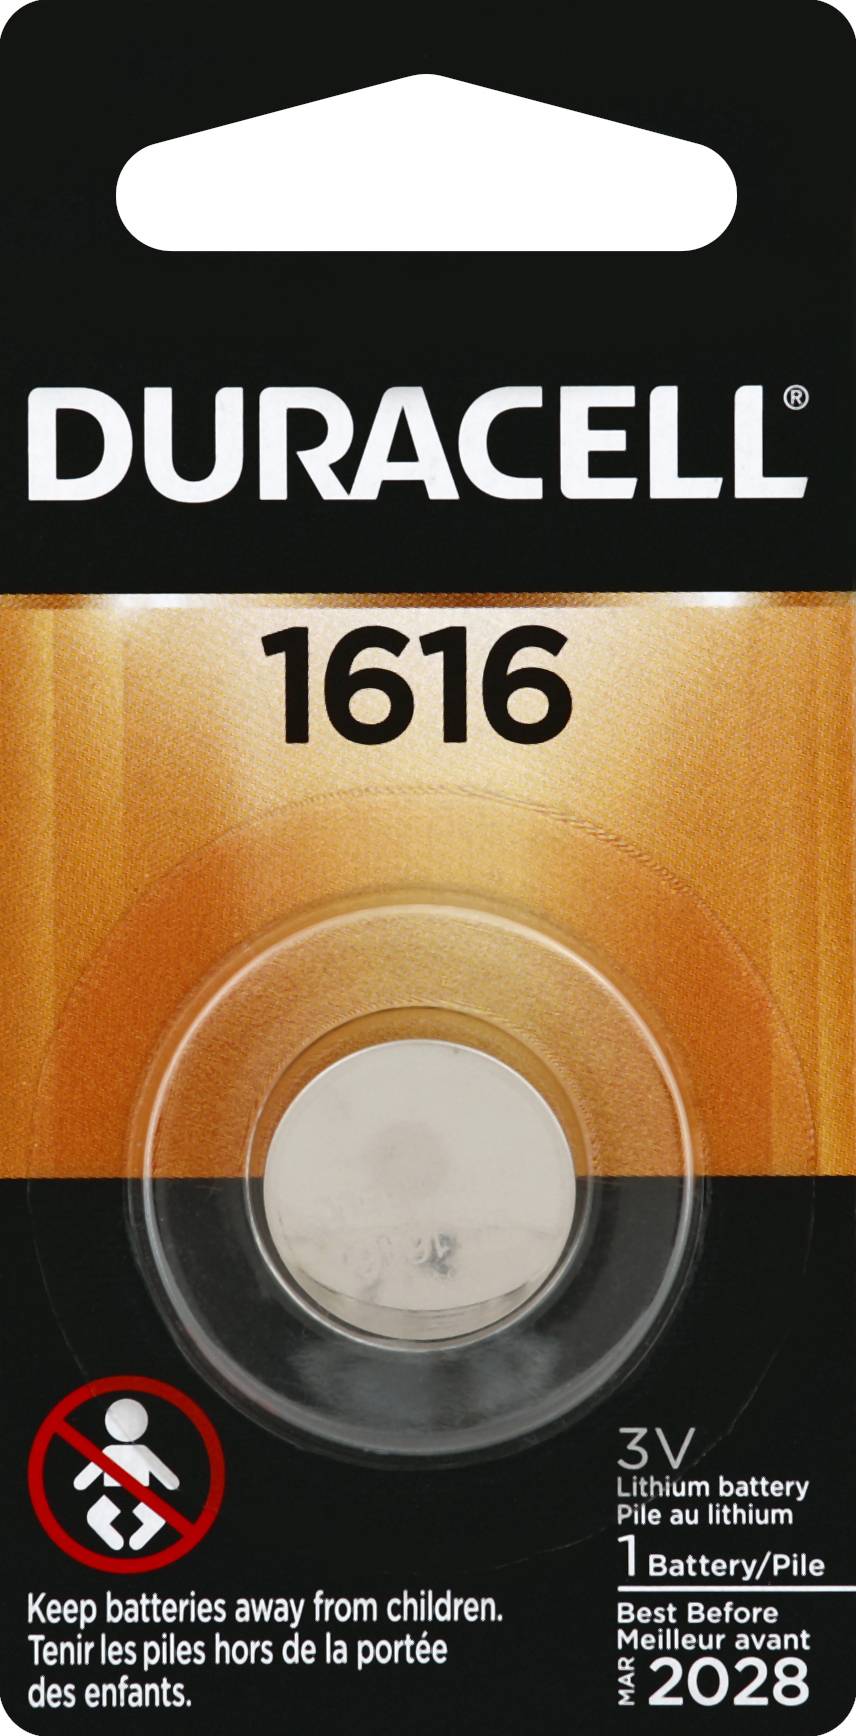 Duracell Lithium Battery 1616